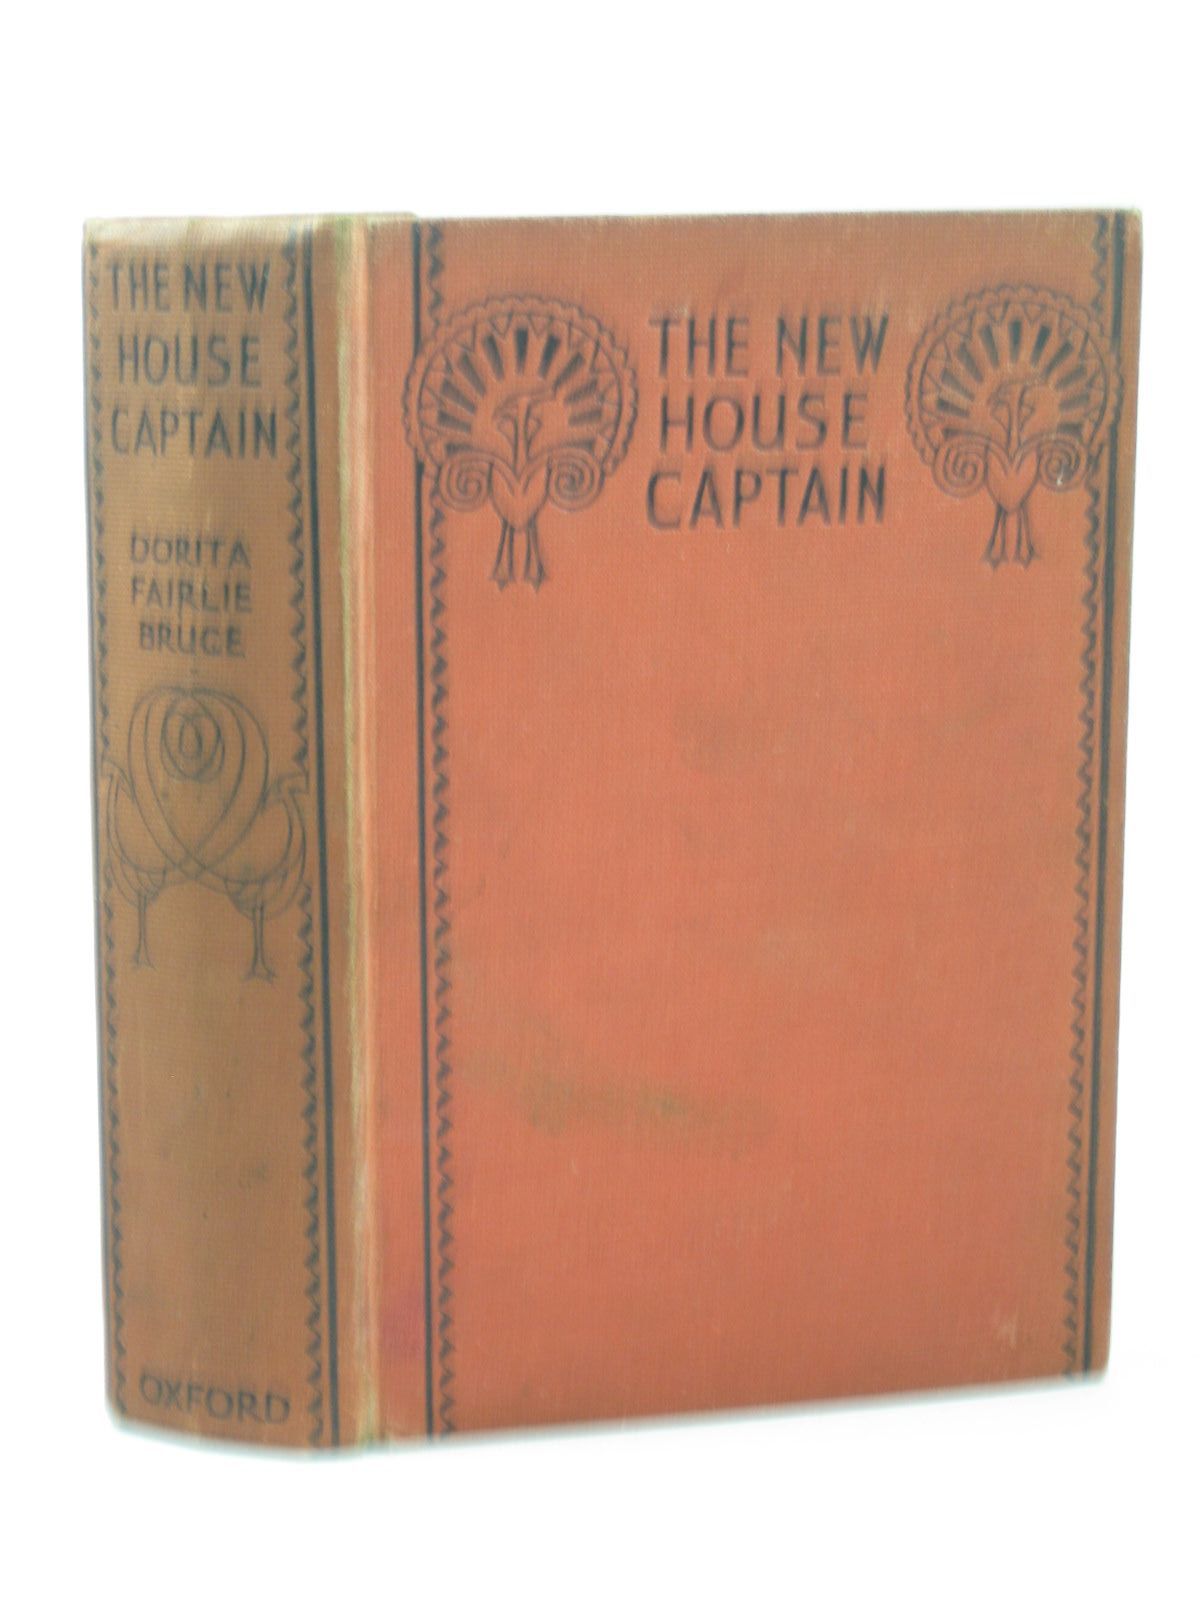 Photo of THE NEW HOUSE CAPTAIN written by Bruce, Dorita Fairlie illustrated by Reeve, Mary Strange published by Humphrey Milford, Oxford University Press (STOCK CODE: 1402408)  for sale by Stella & Rose's Books